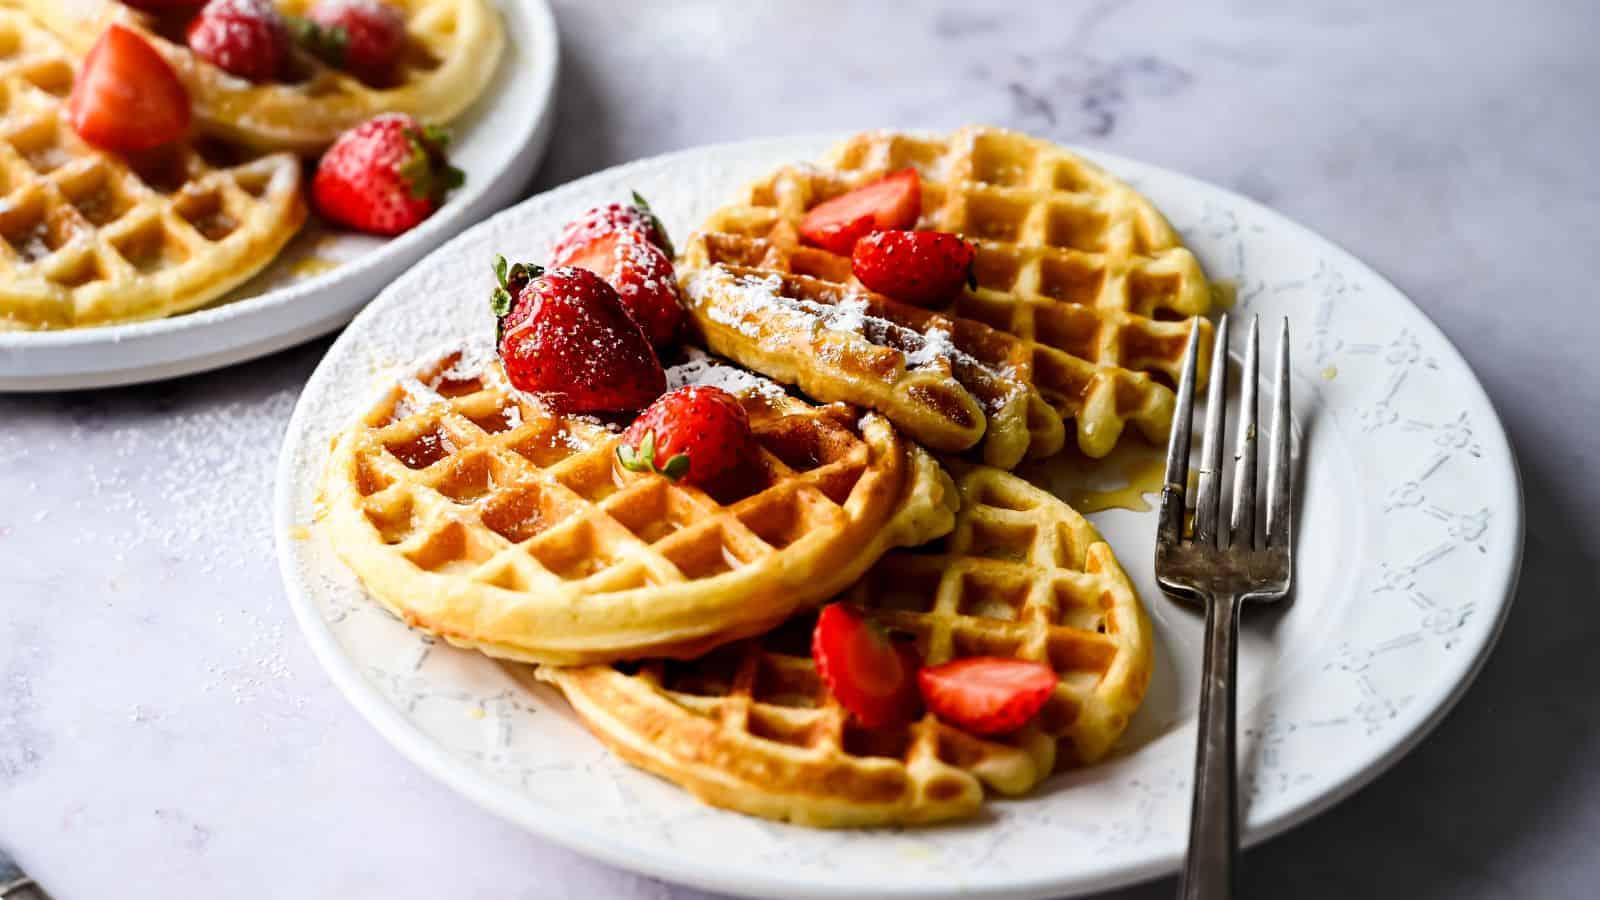 <p>Take a trip down breakfast memory lane with these classic waffles. Whether you prefer them with syrup, fruit, or your favorite spread, these golden delights offer a quick and tasty way to add a touch of joy to your morning routine. They’re a simple yet timeless choice that never fails to please.<br><strong>Get the Recipe: </strong><a href="https://www.splashoftaste.com/waffle-recipe/?utm_source=msn&utm_medium=page&utm_campaign=msn">Waffles</a></p>